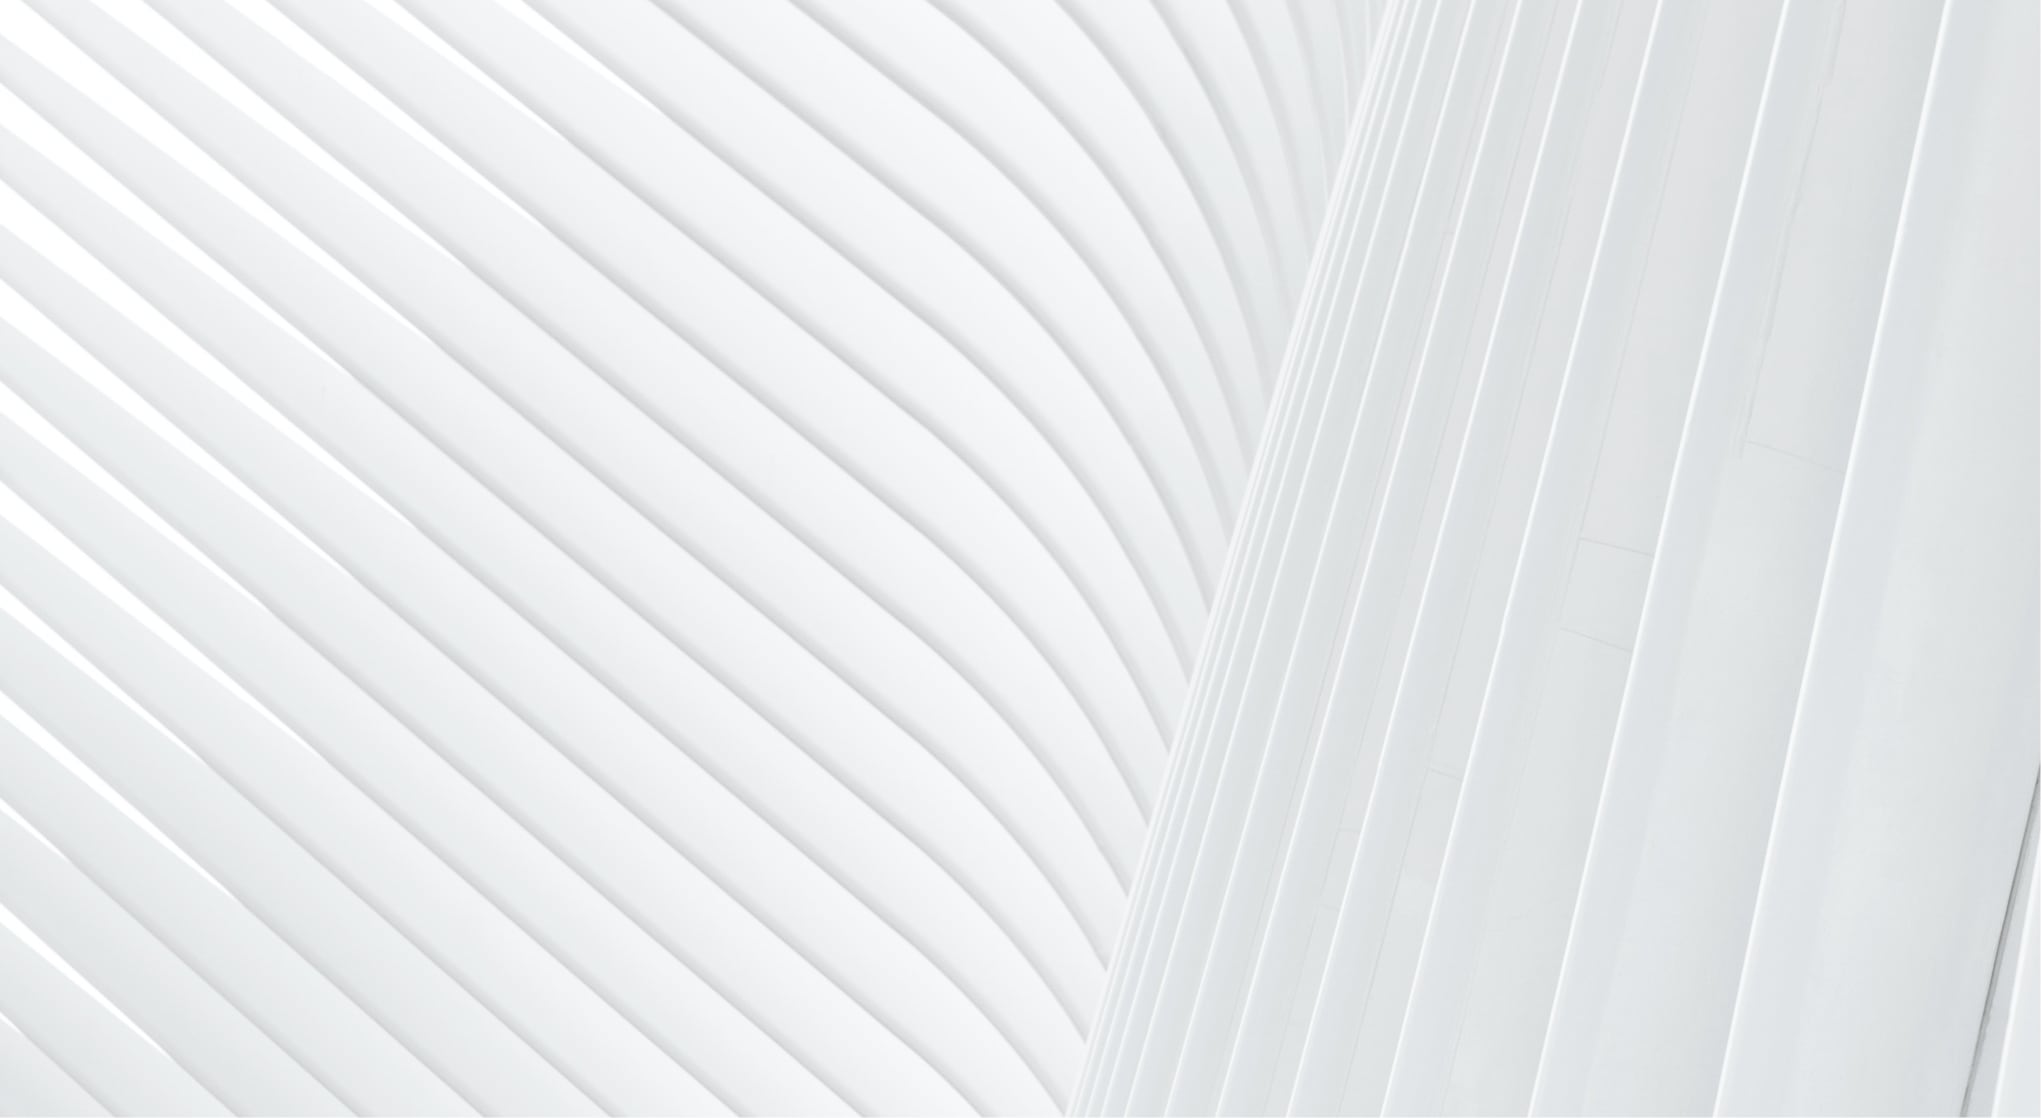 A white background with a wavy pattern.